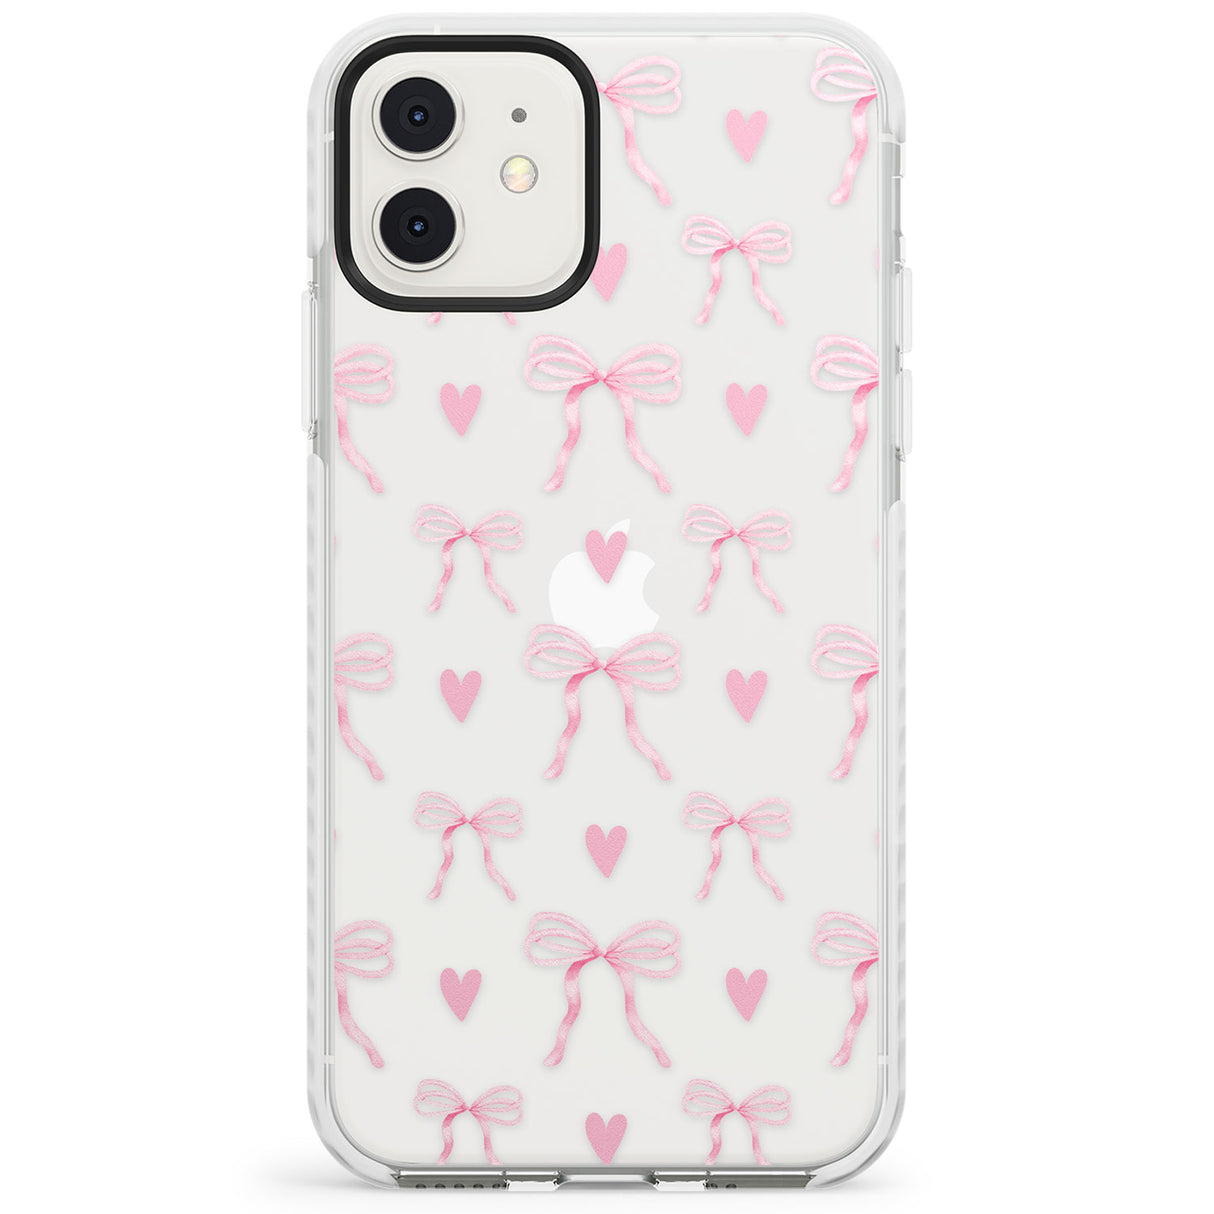 Pink Bows & Hearts Impact Phone Case for iPhone 11, iphone 12